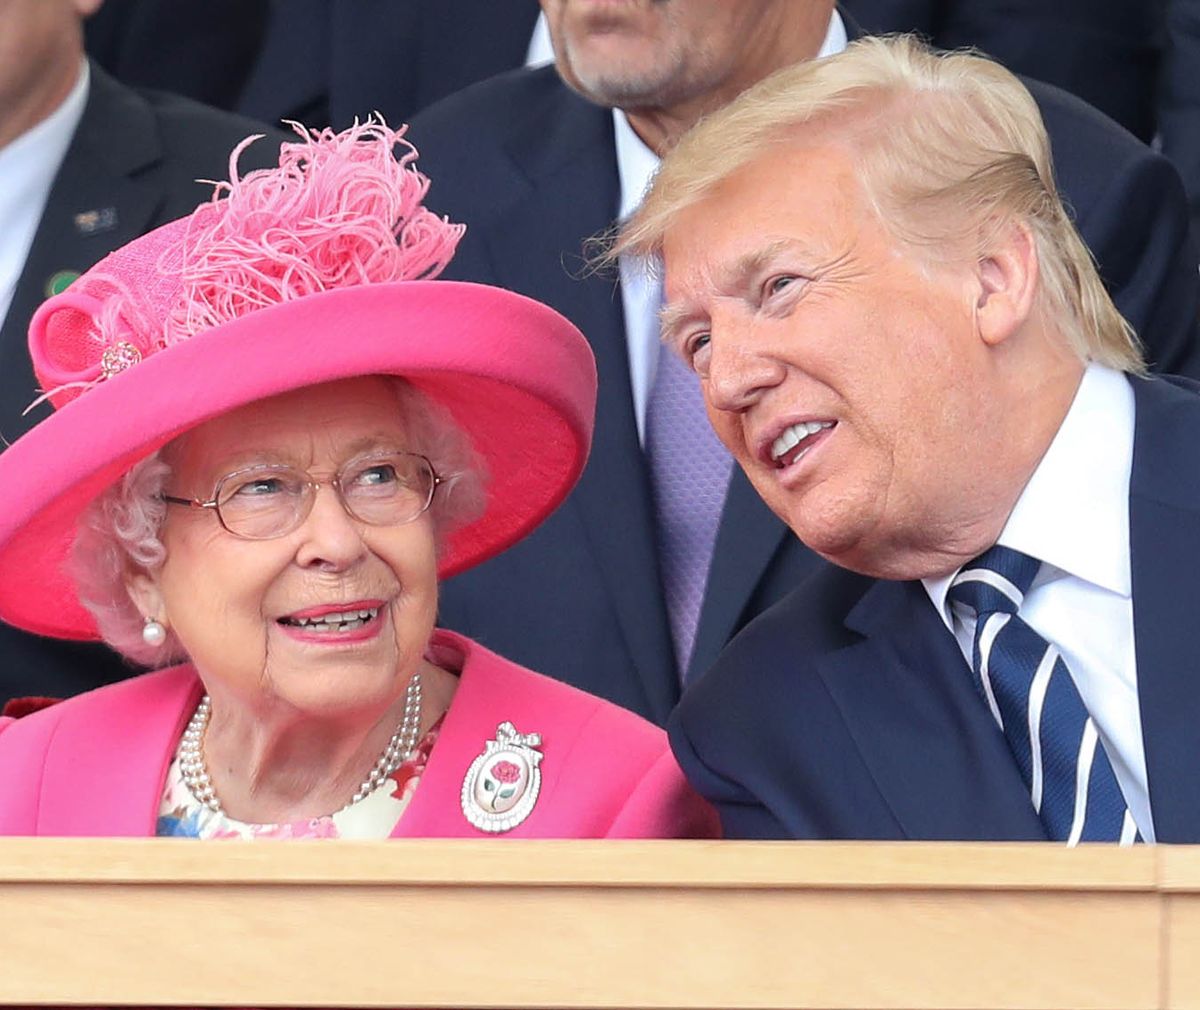 WATCH: Maggie Haberman Ridicules Trump for Thinking He Had Special Relationship with Queen Elizabeth